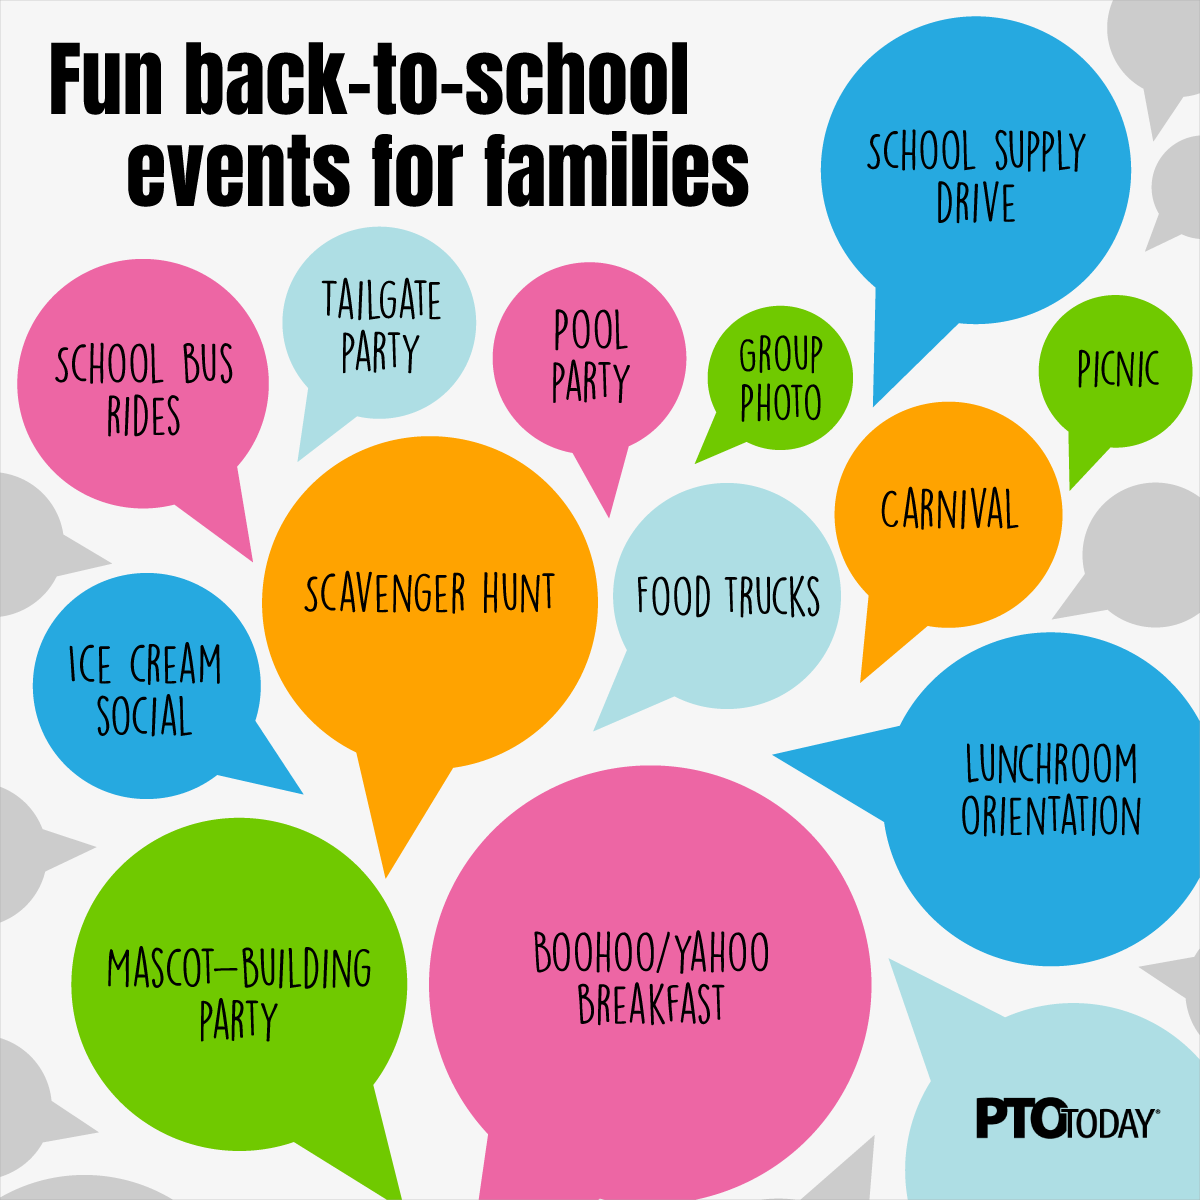 Plan a fun back-to-school event